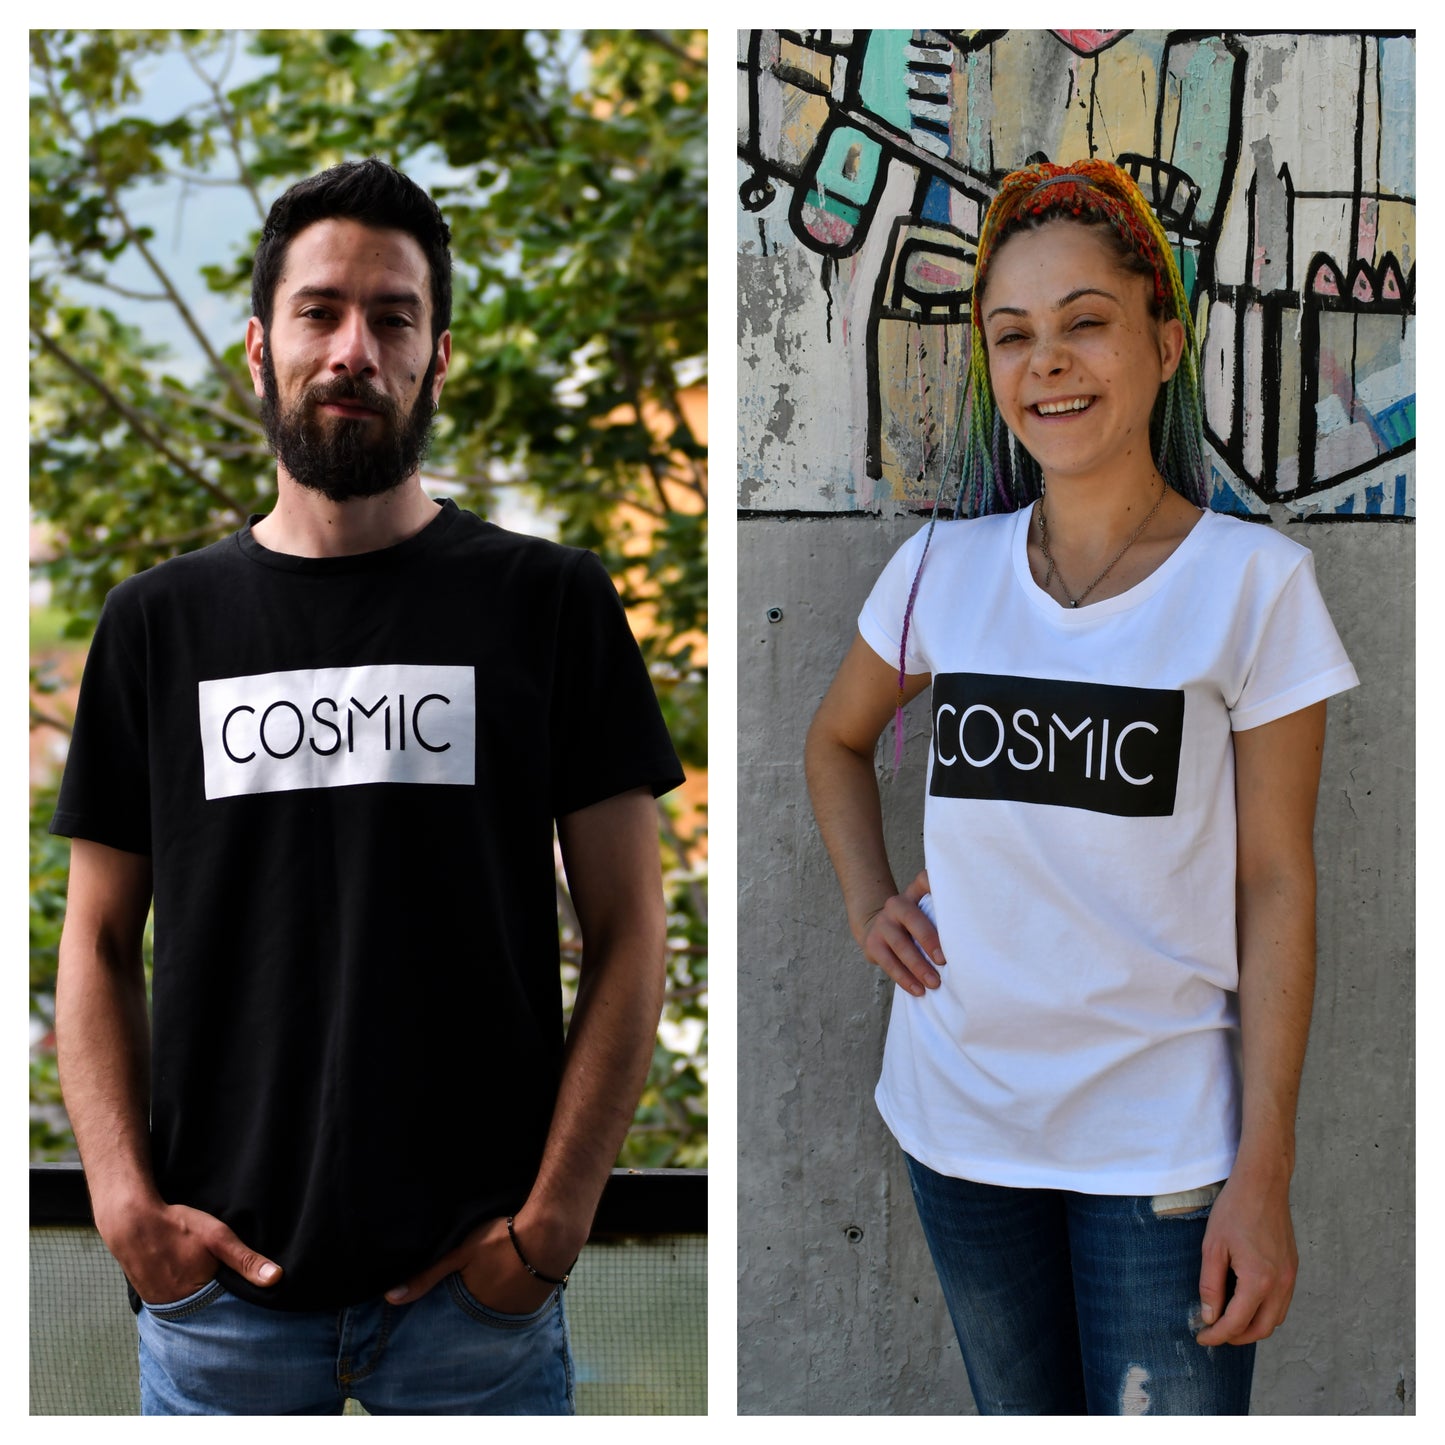 "Cosmic" Black and White Partner T-Shirts - Cosmic Hippos